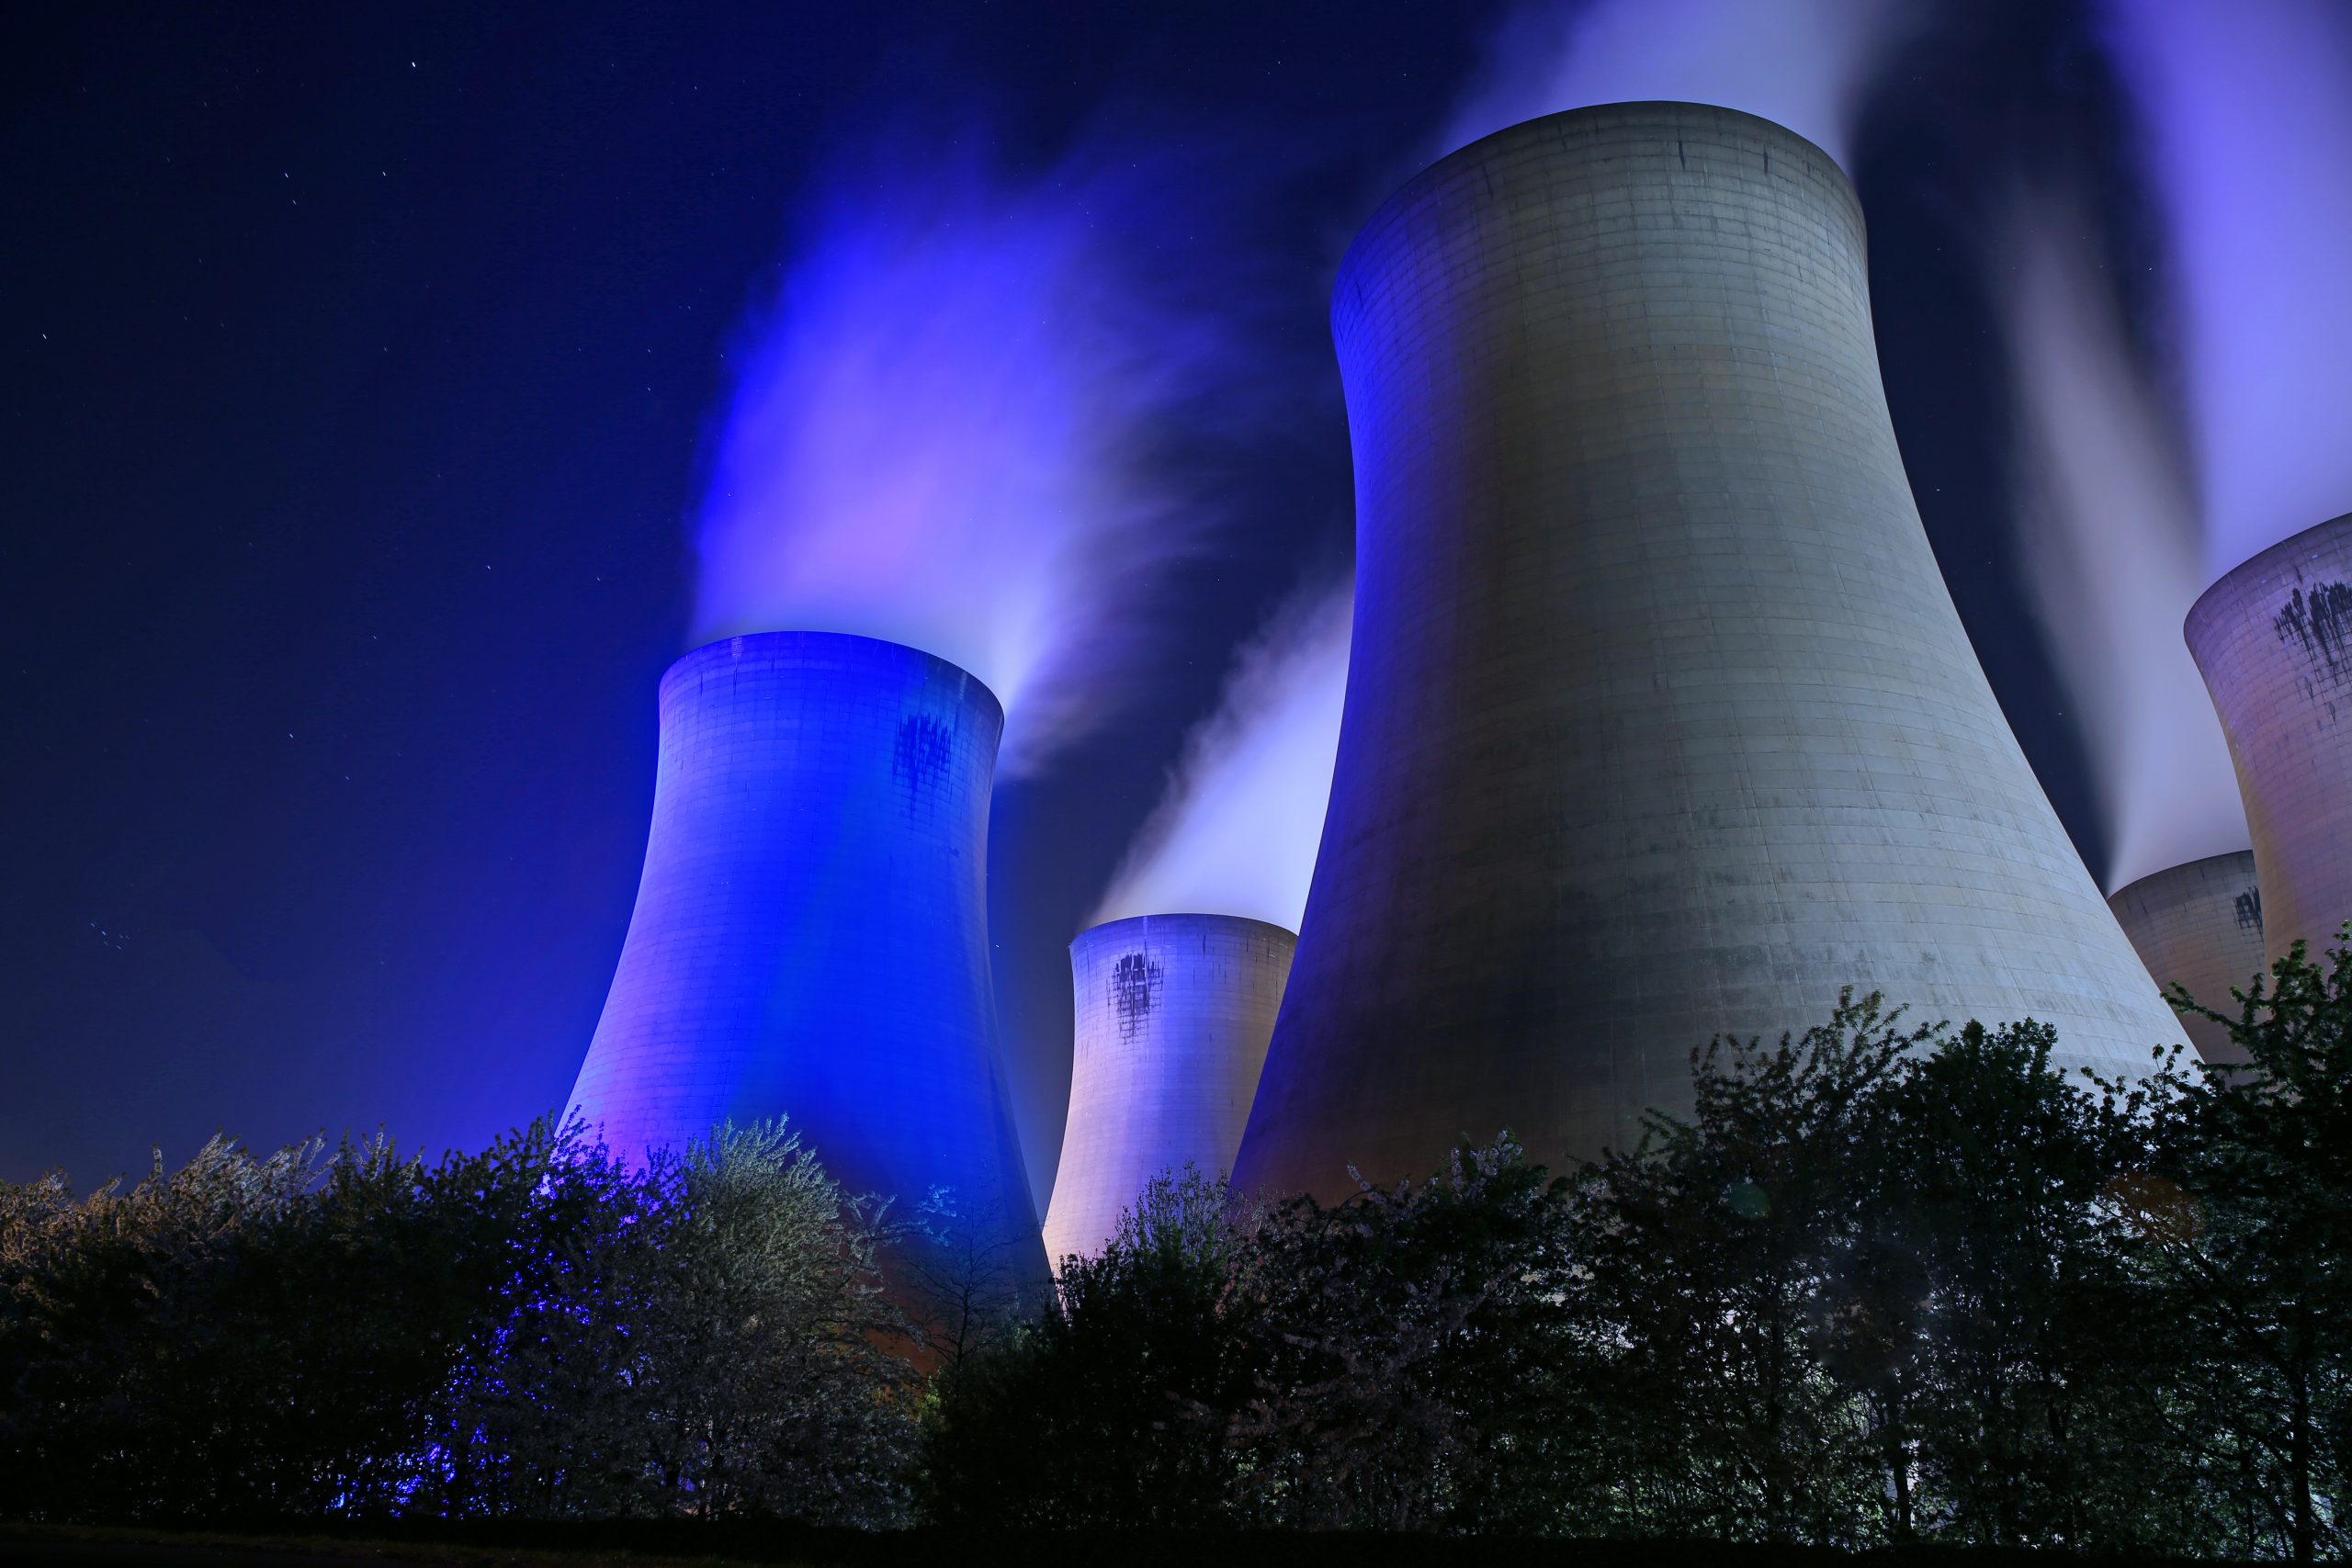 Drax Power Station cooling tower turned blue for the NHS and #ClapForCarers